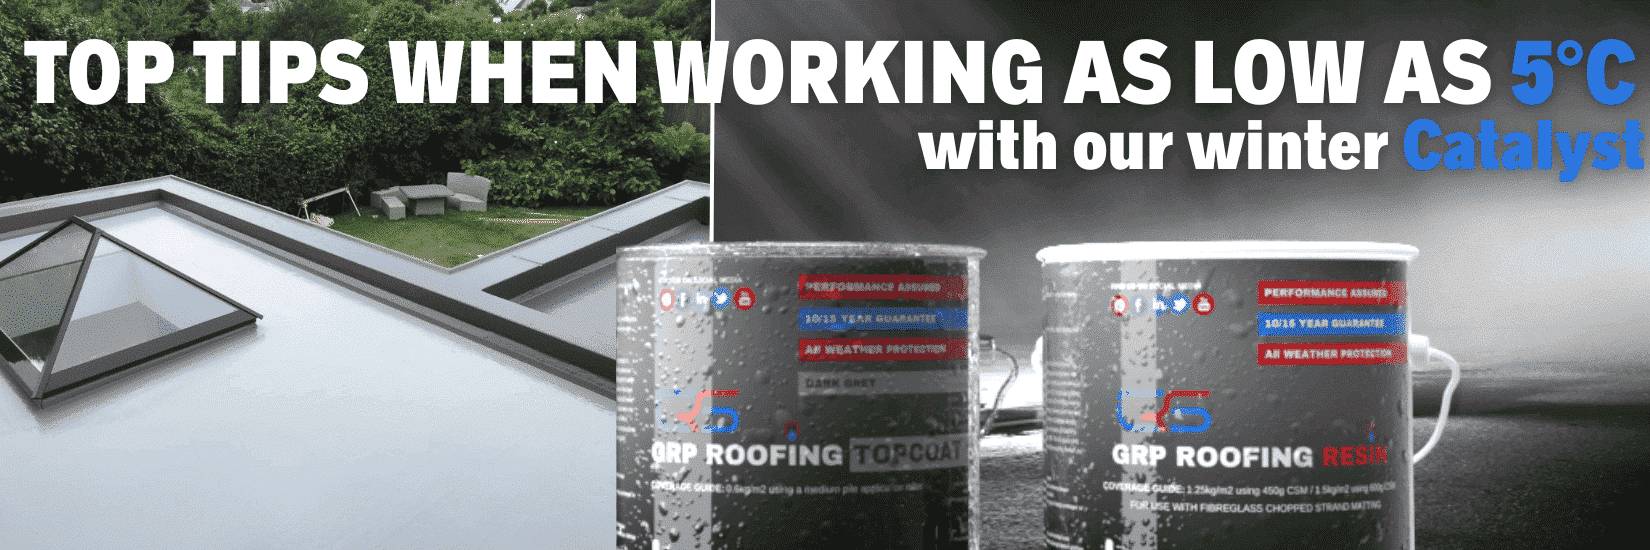 GRP ROOFING IN WINTER